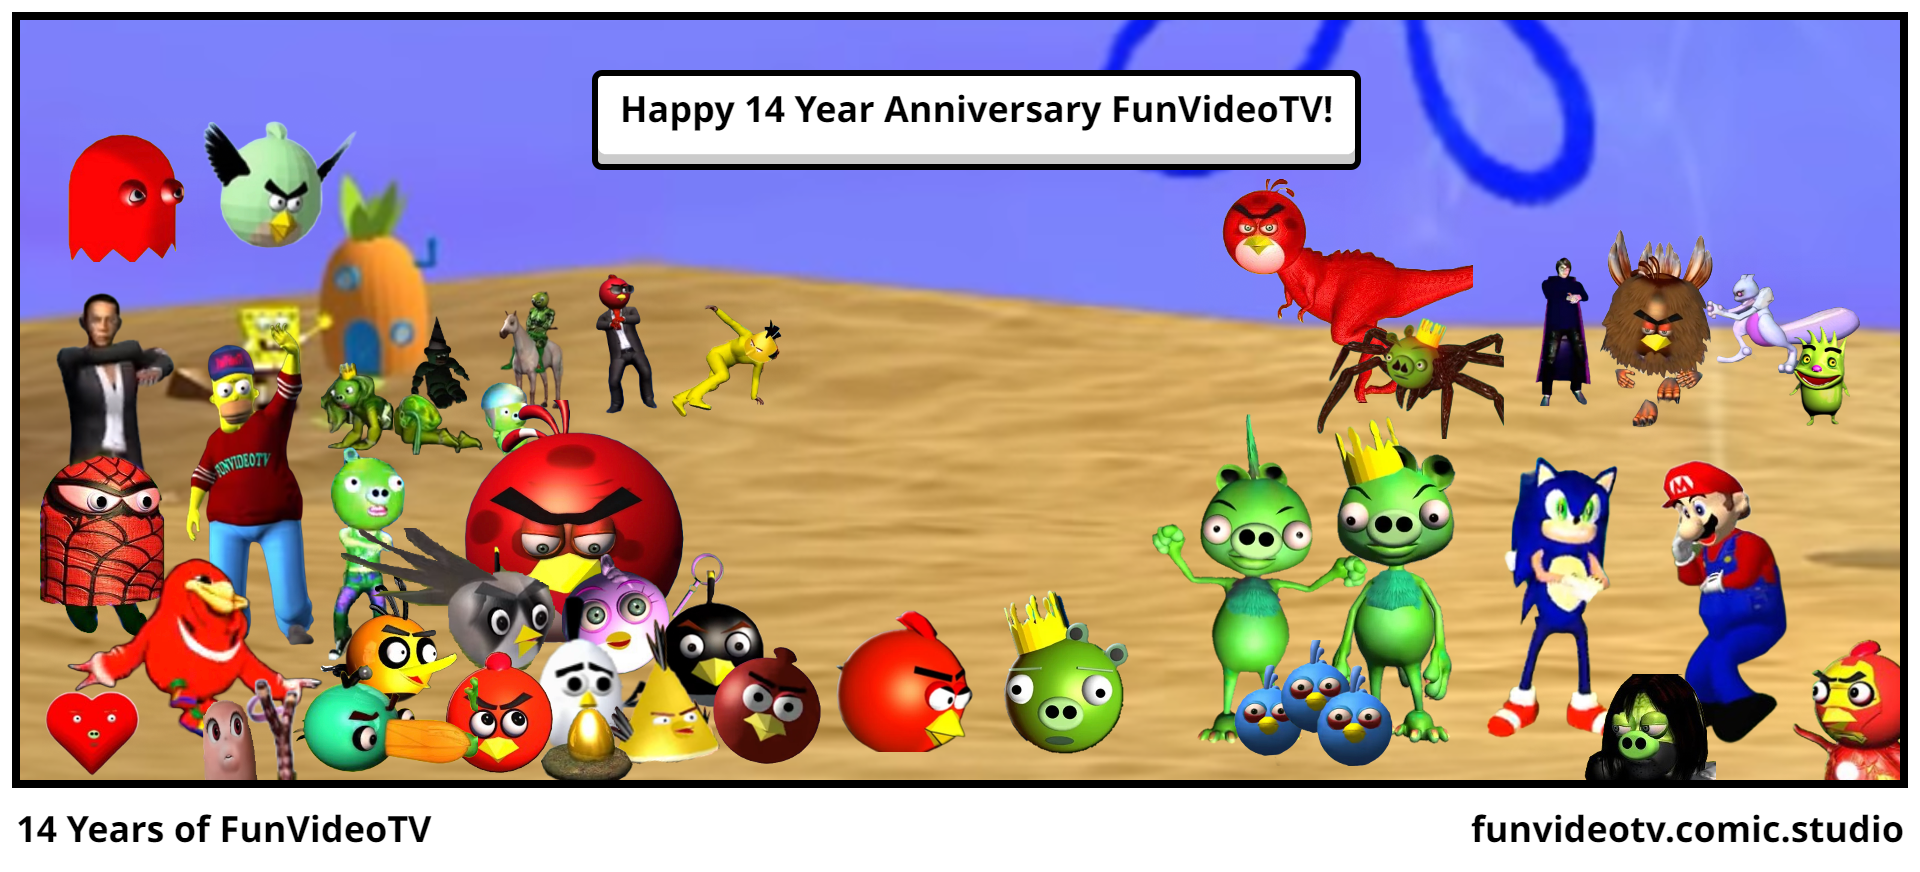 14 Years of FunVideoTV